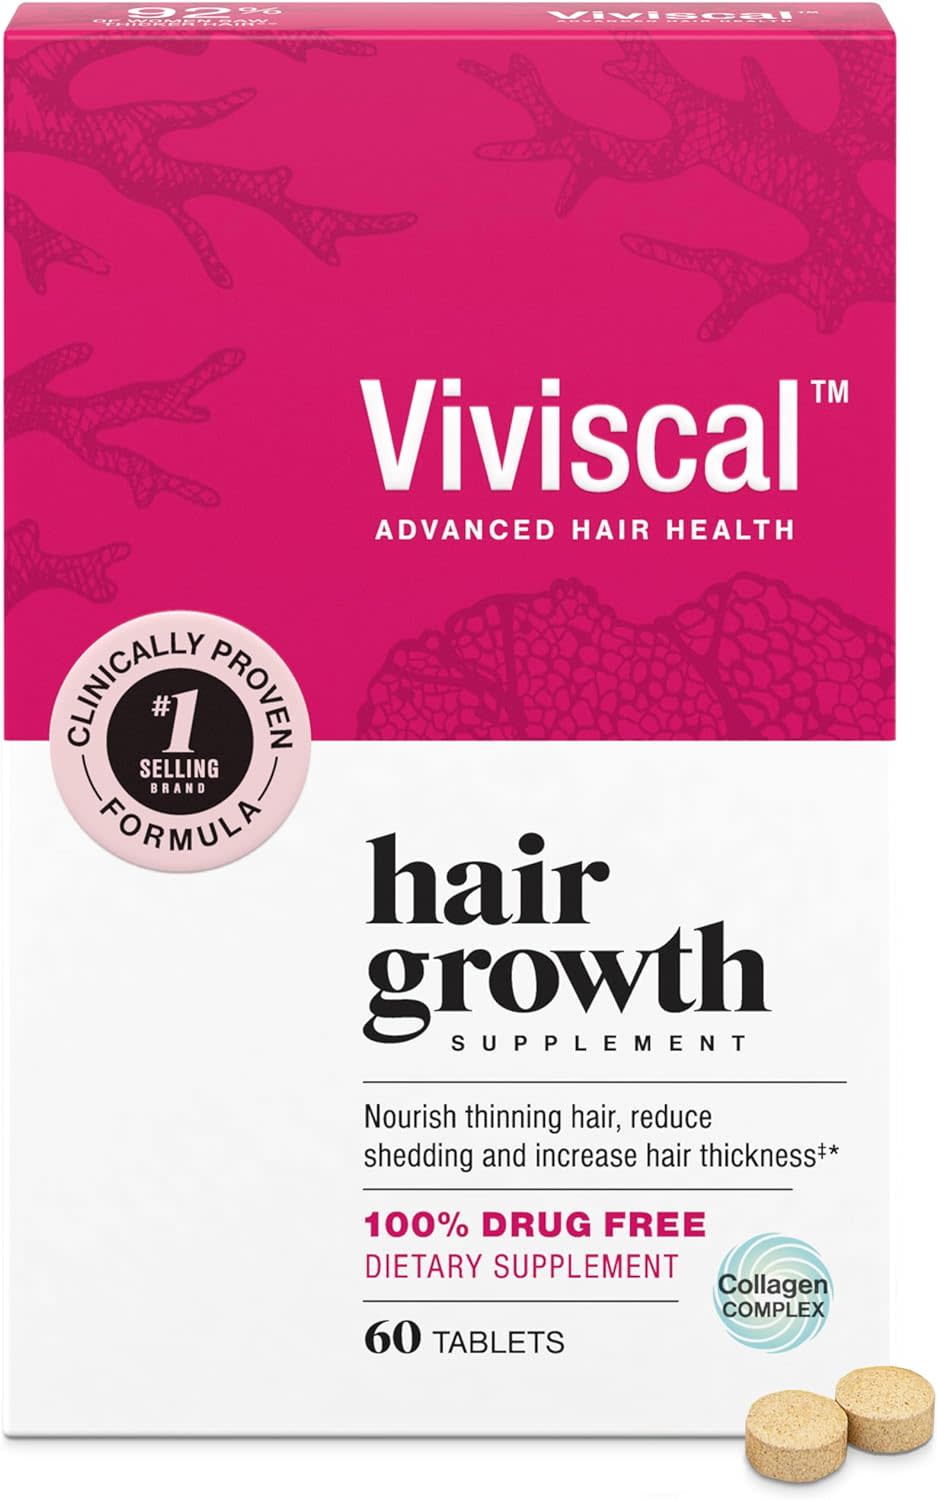 Viviscal Hair Growth Supplement, one of the best hair growth supplements